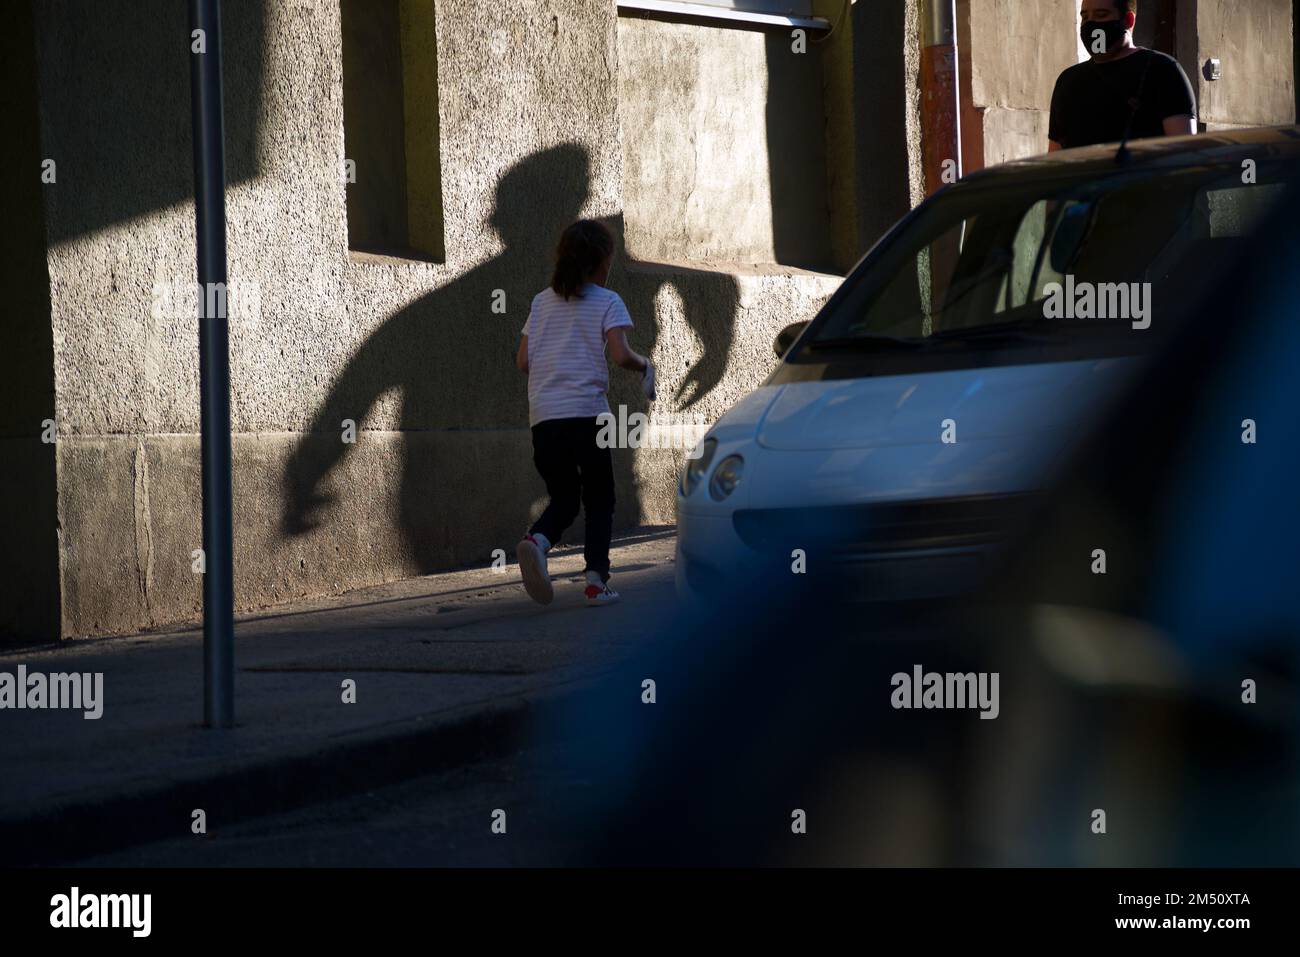 Child and stranger's frightening shadow on a street Stock Photo